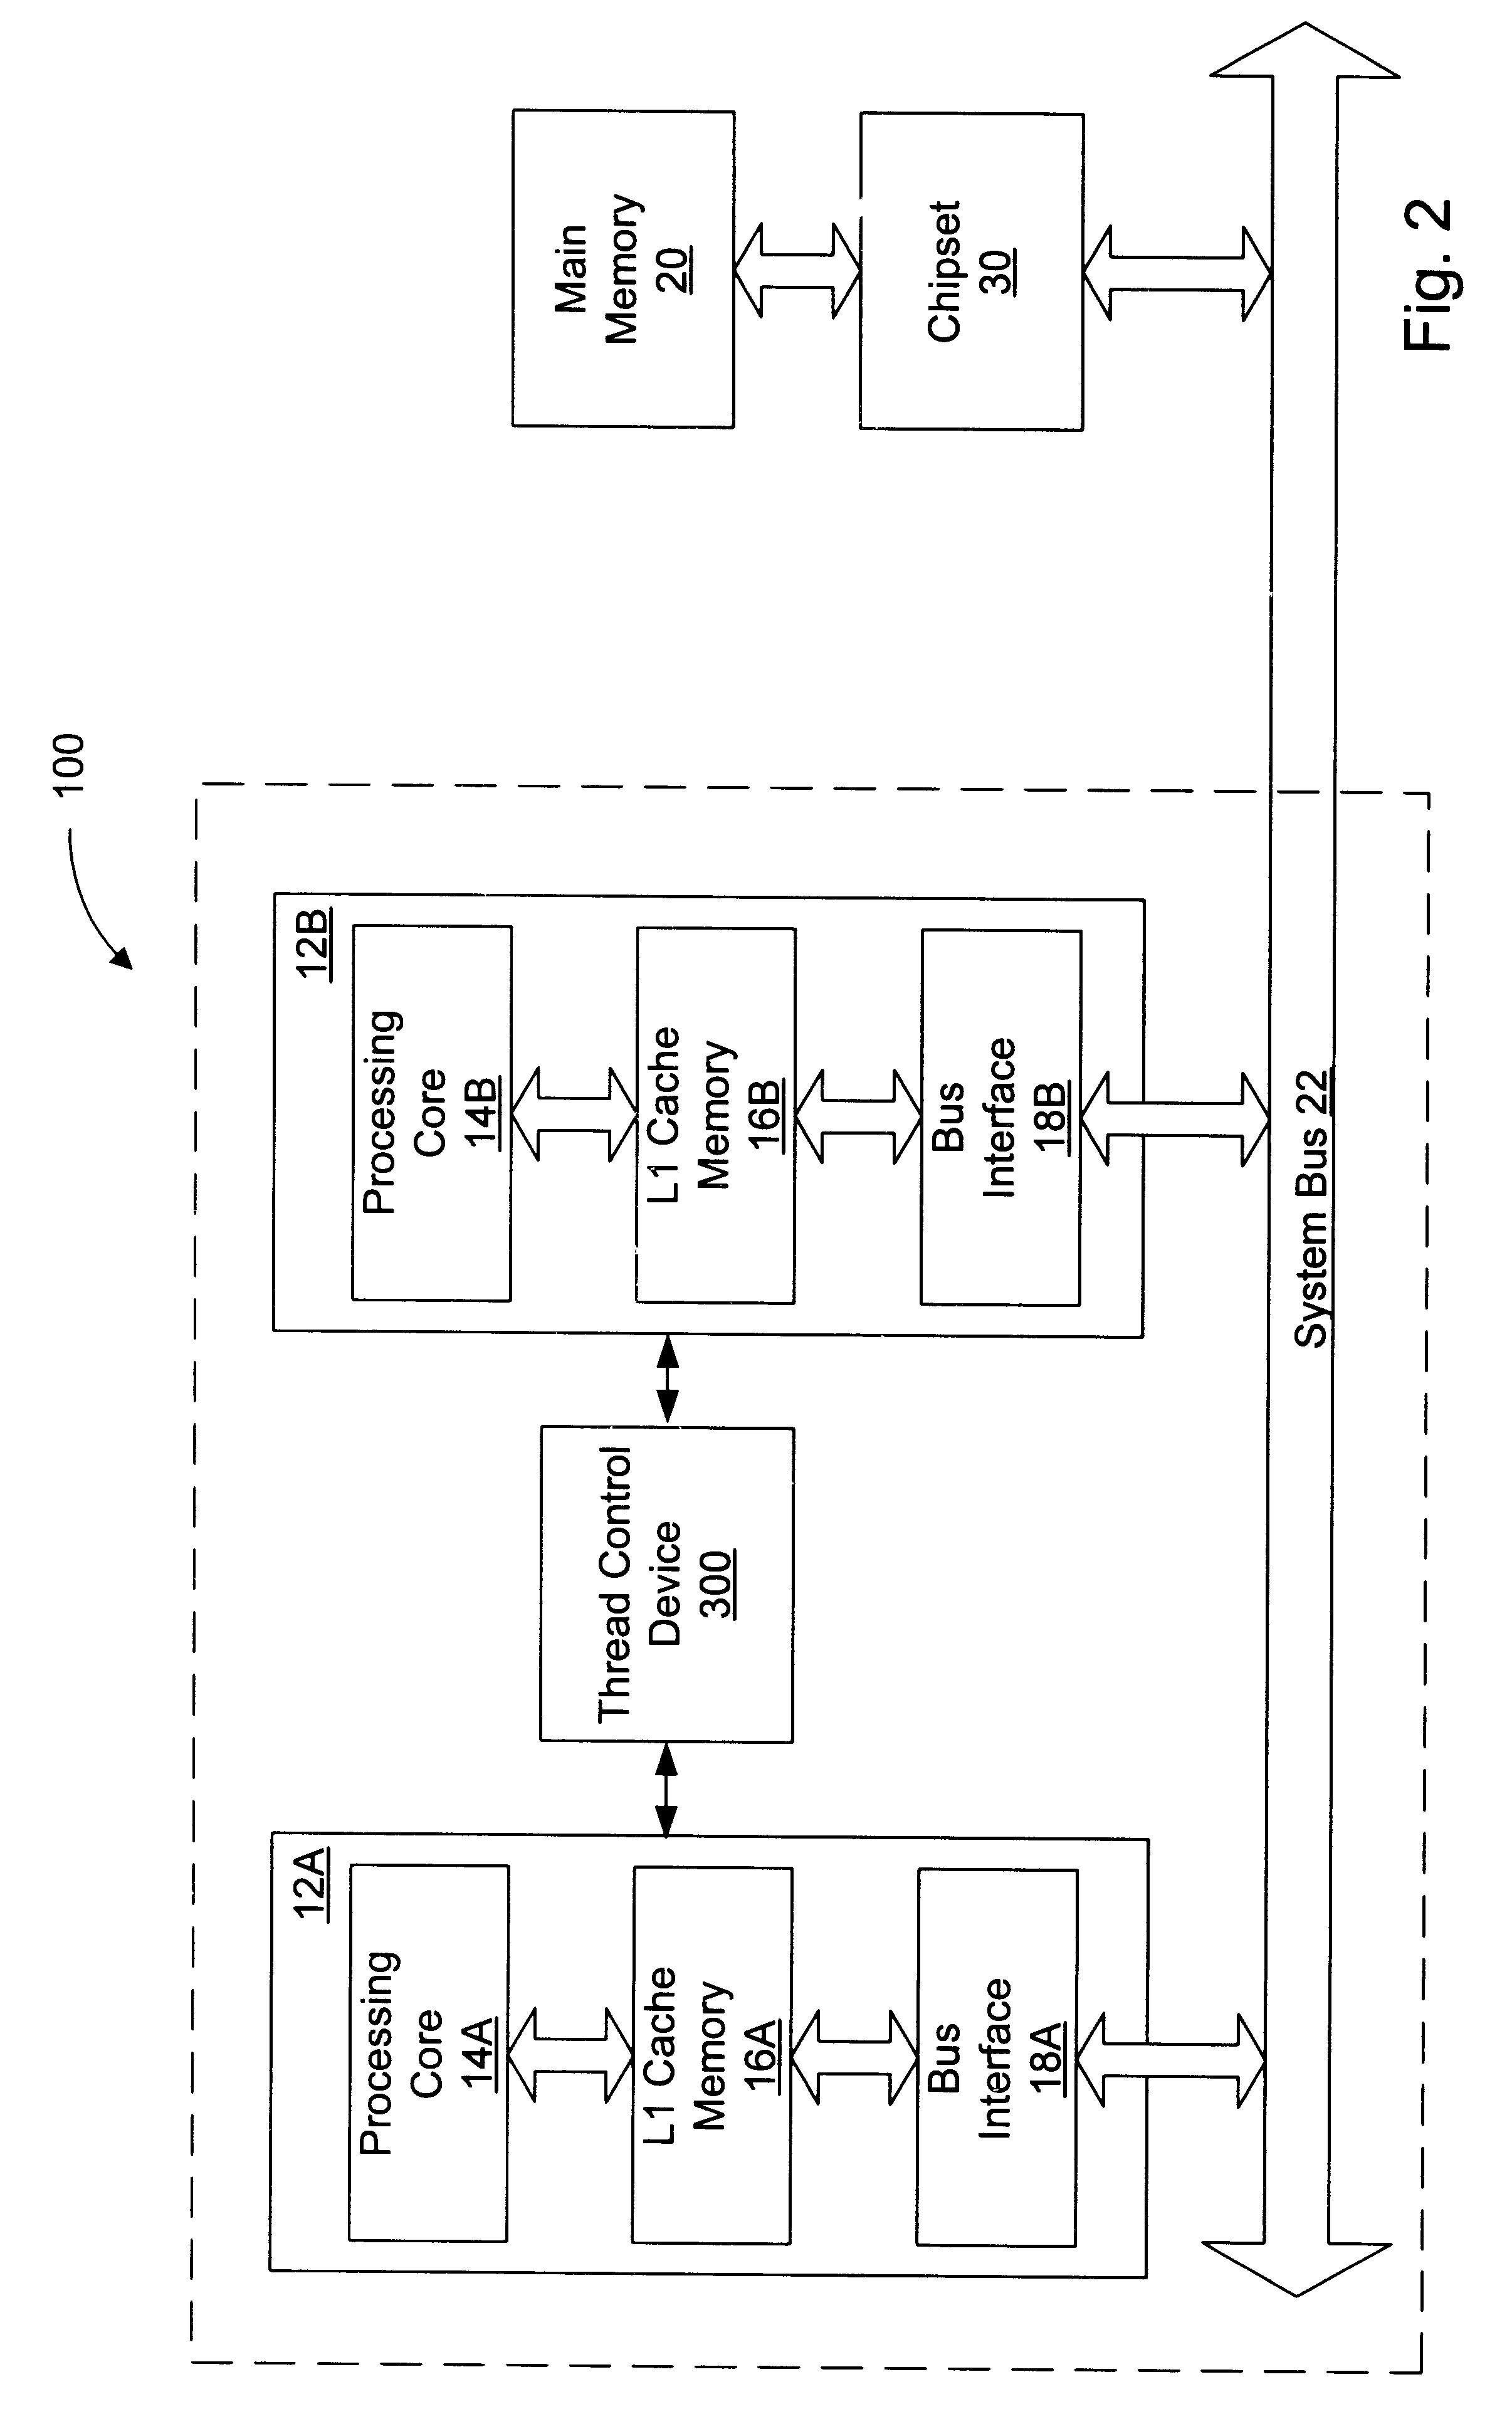 Method and mechanism for speculatively executing threads of instructions